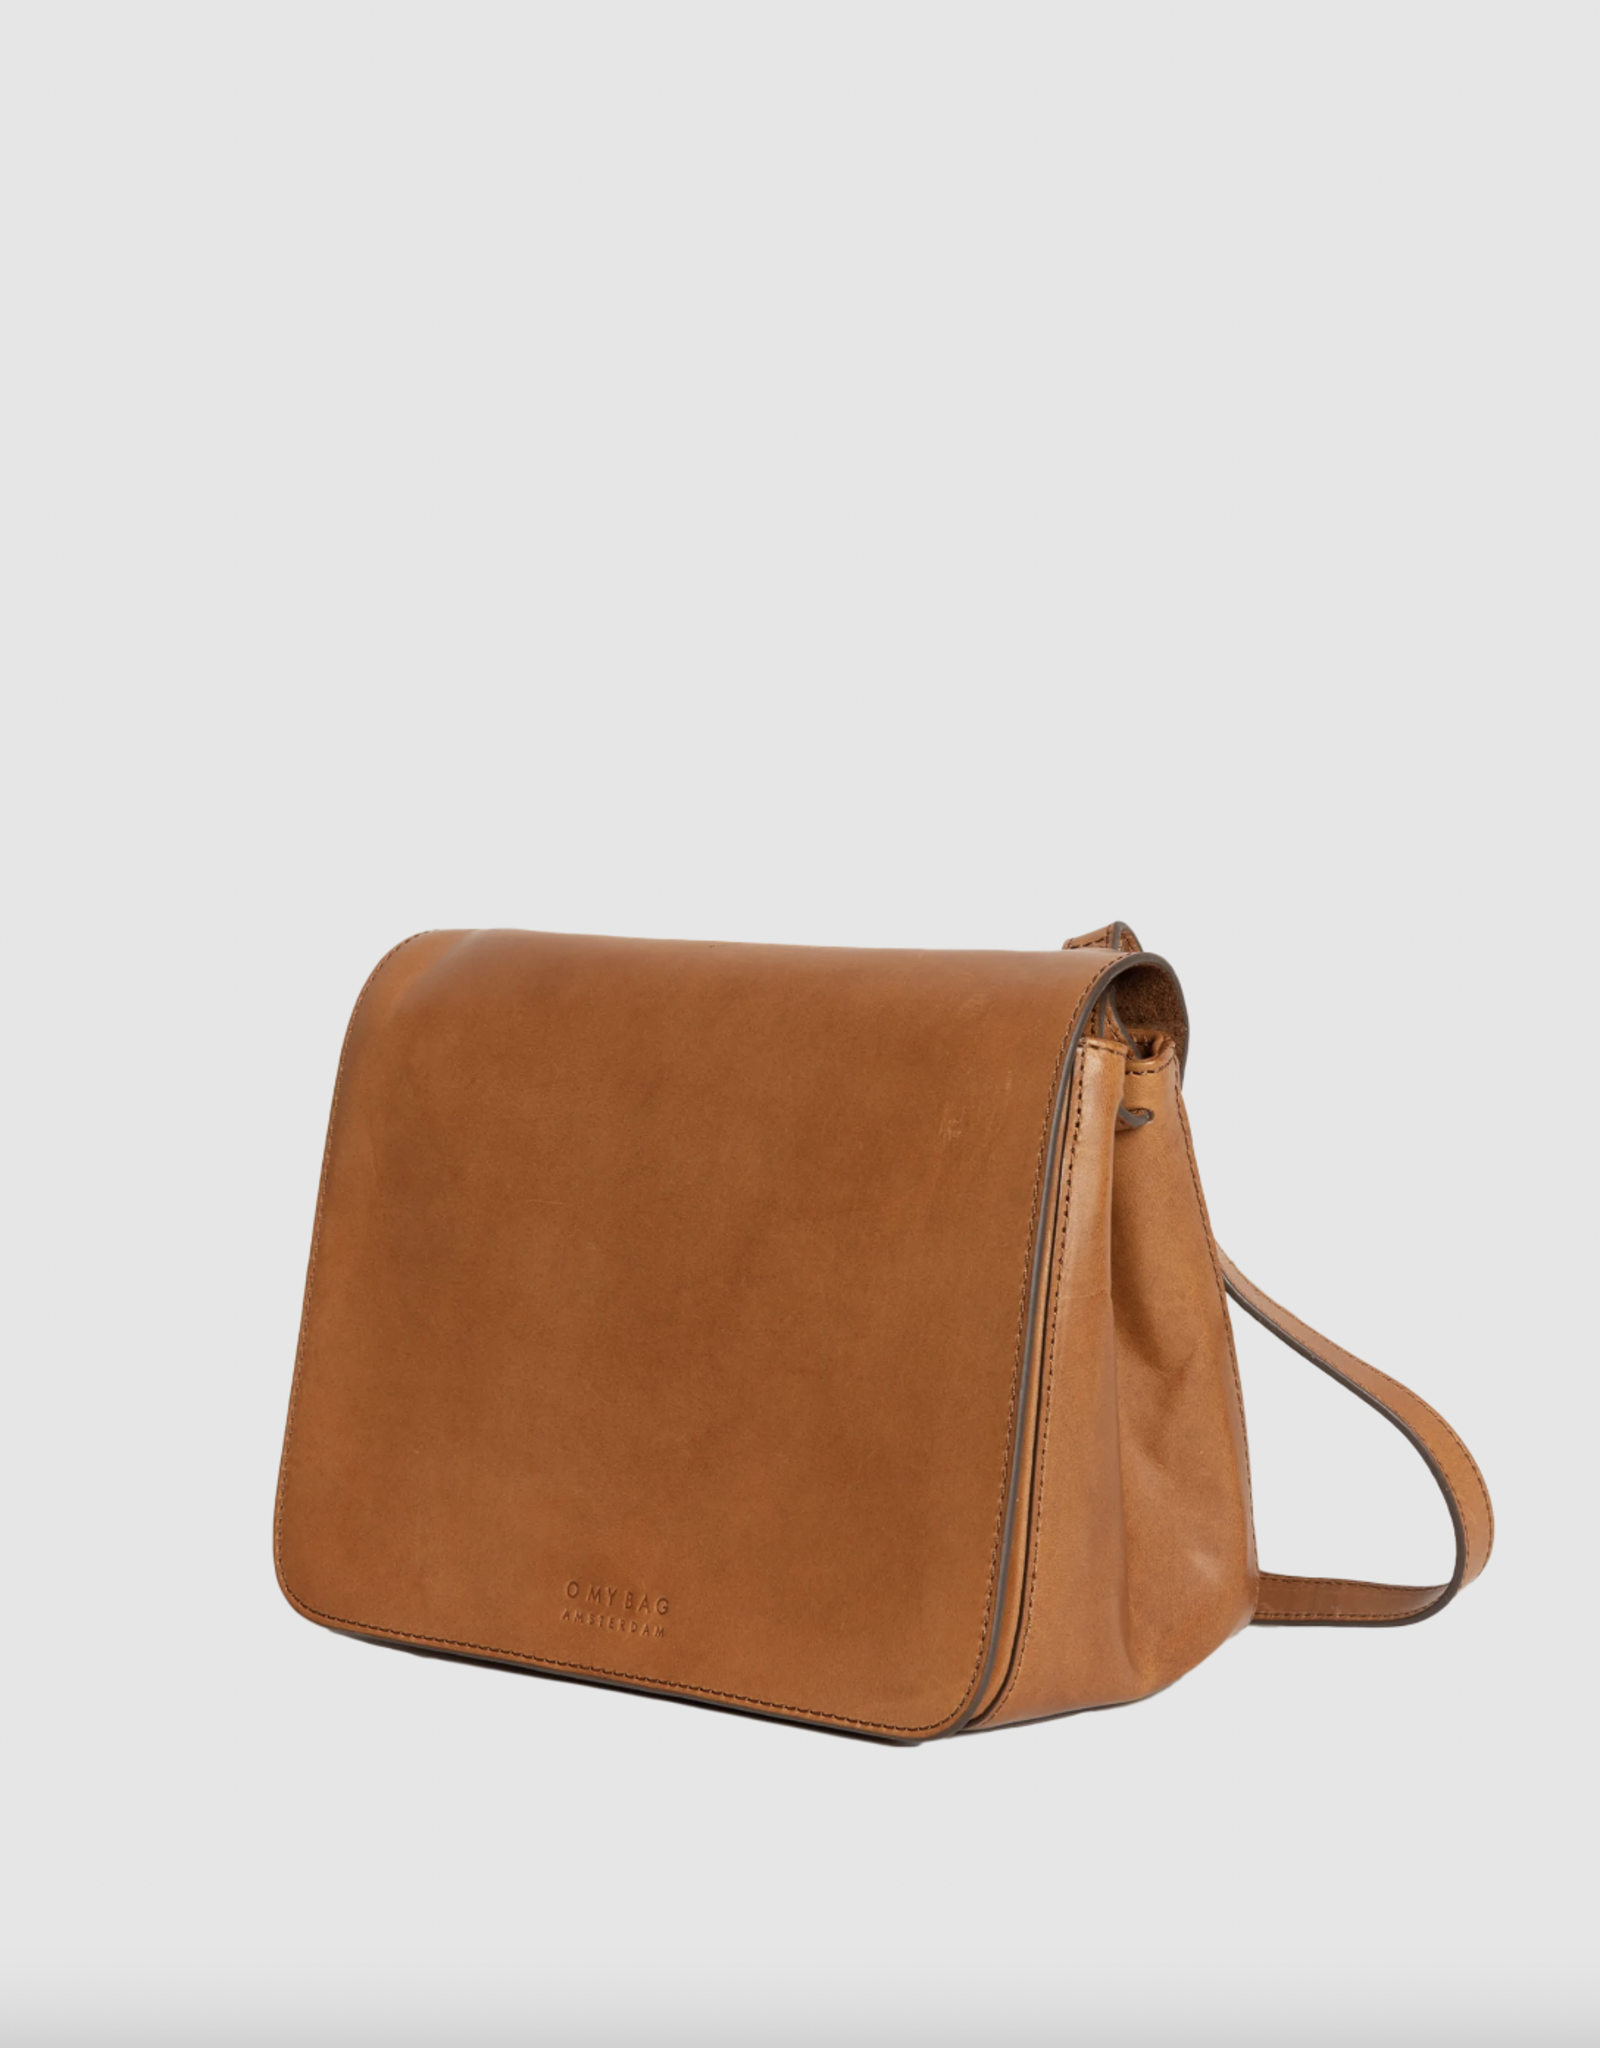 O My Bag The Lucy - cognac classic leather